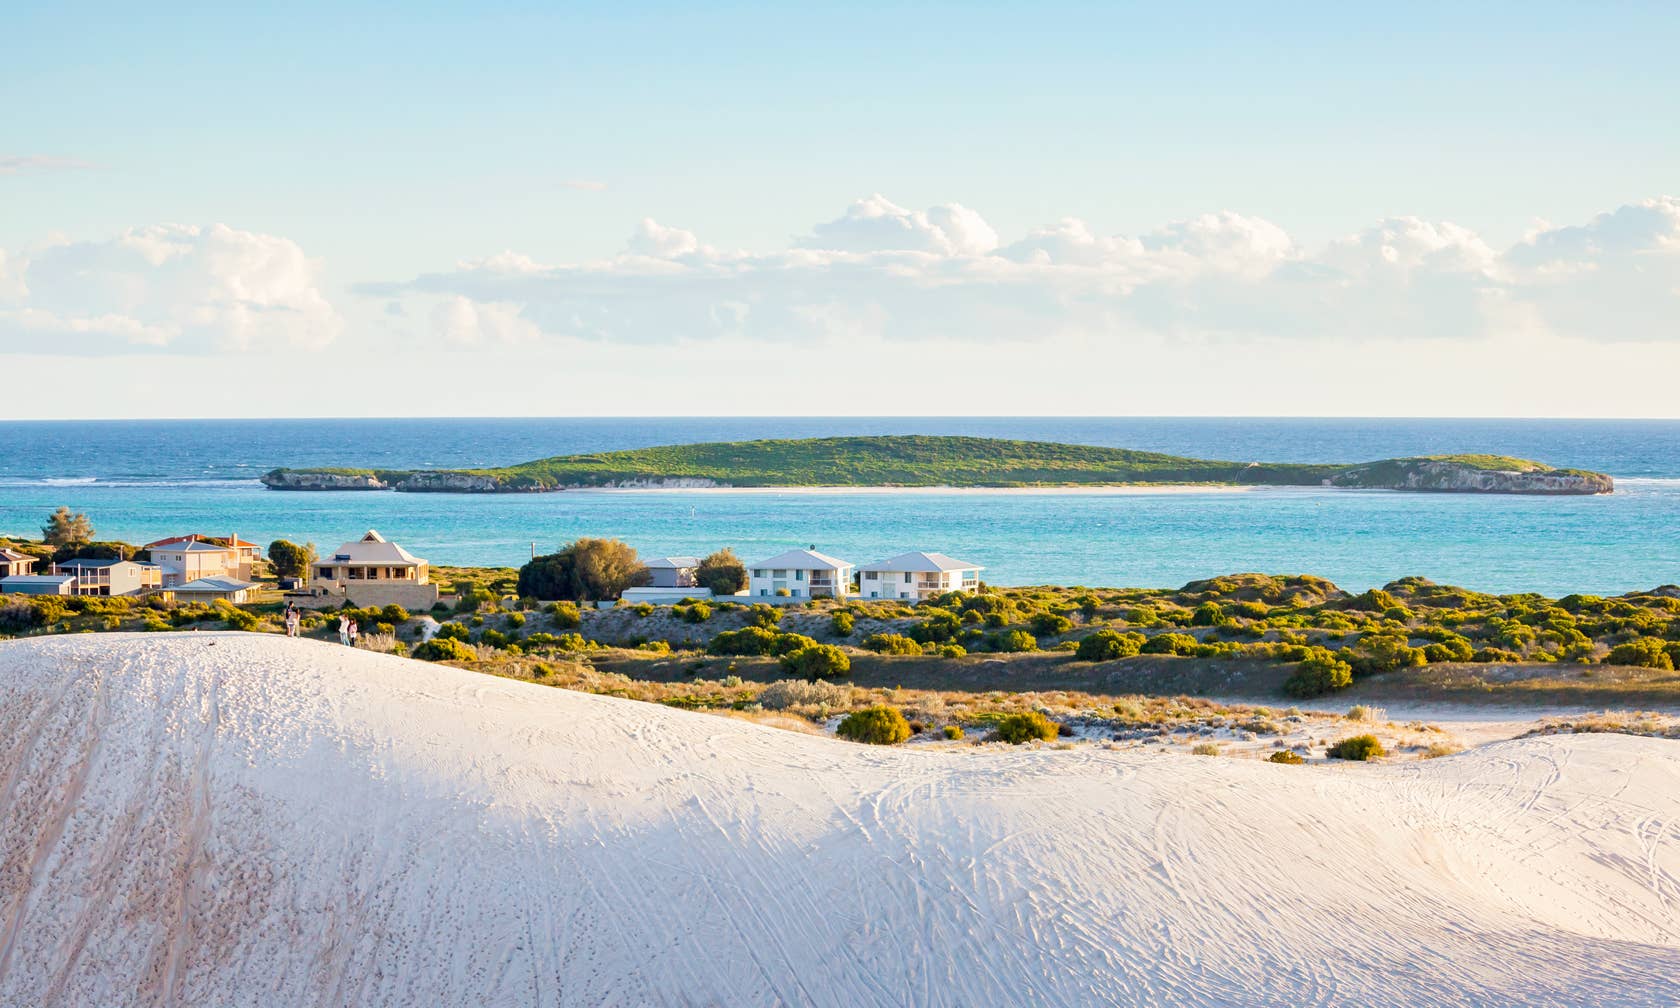 Holiday rental houses in Lancelin